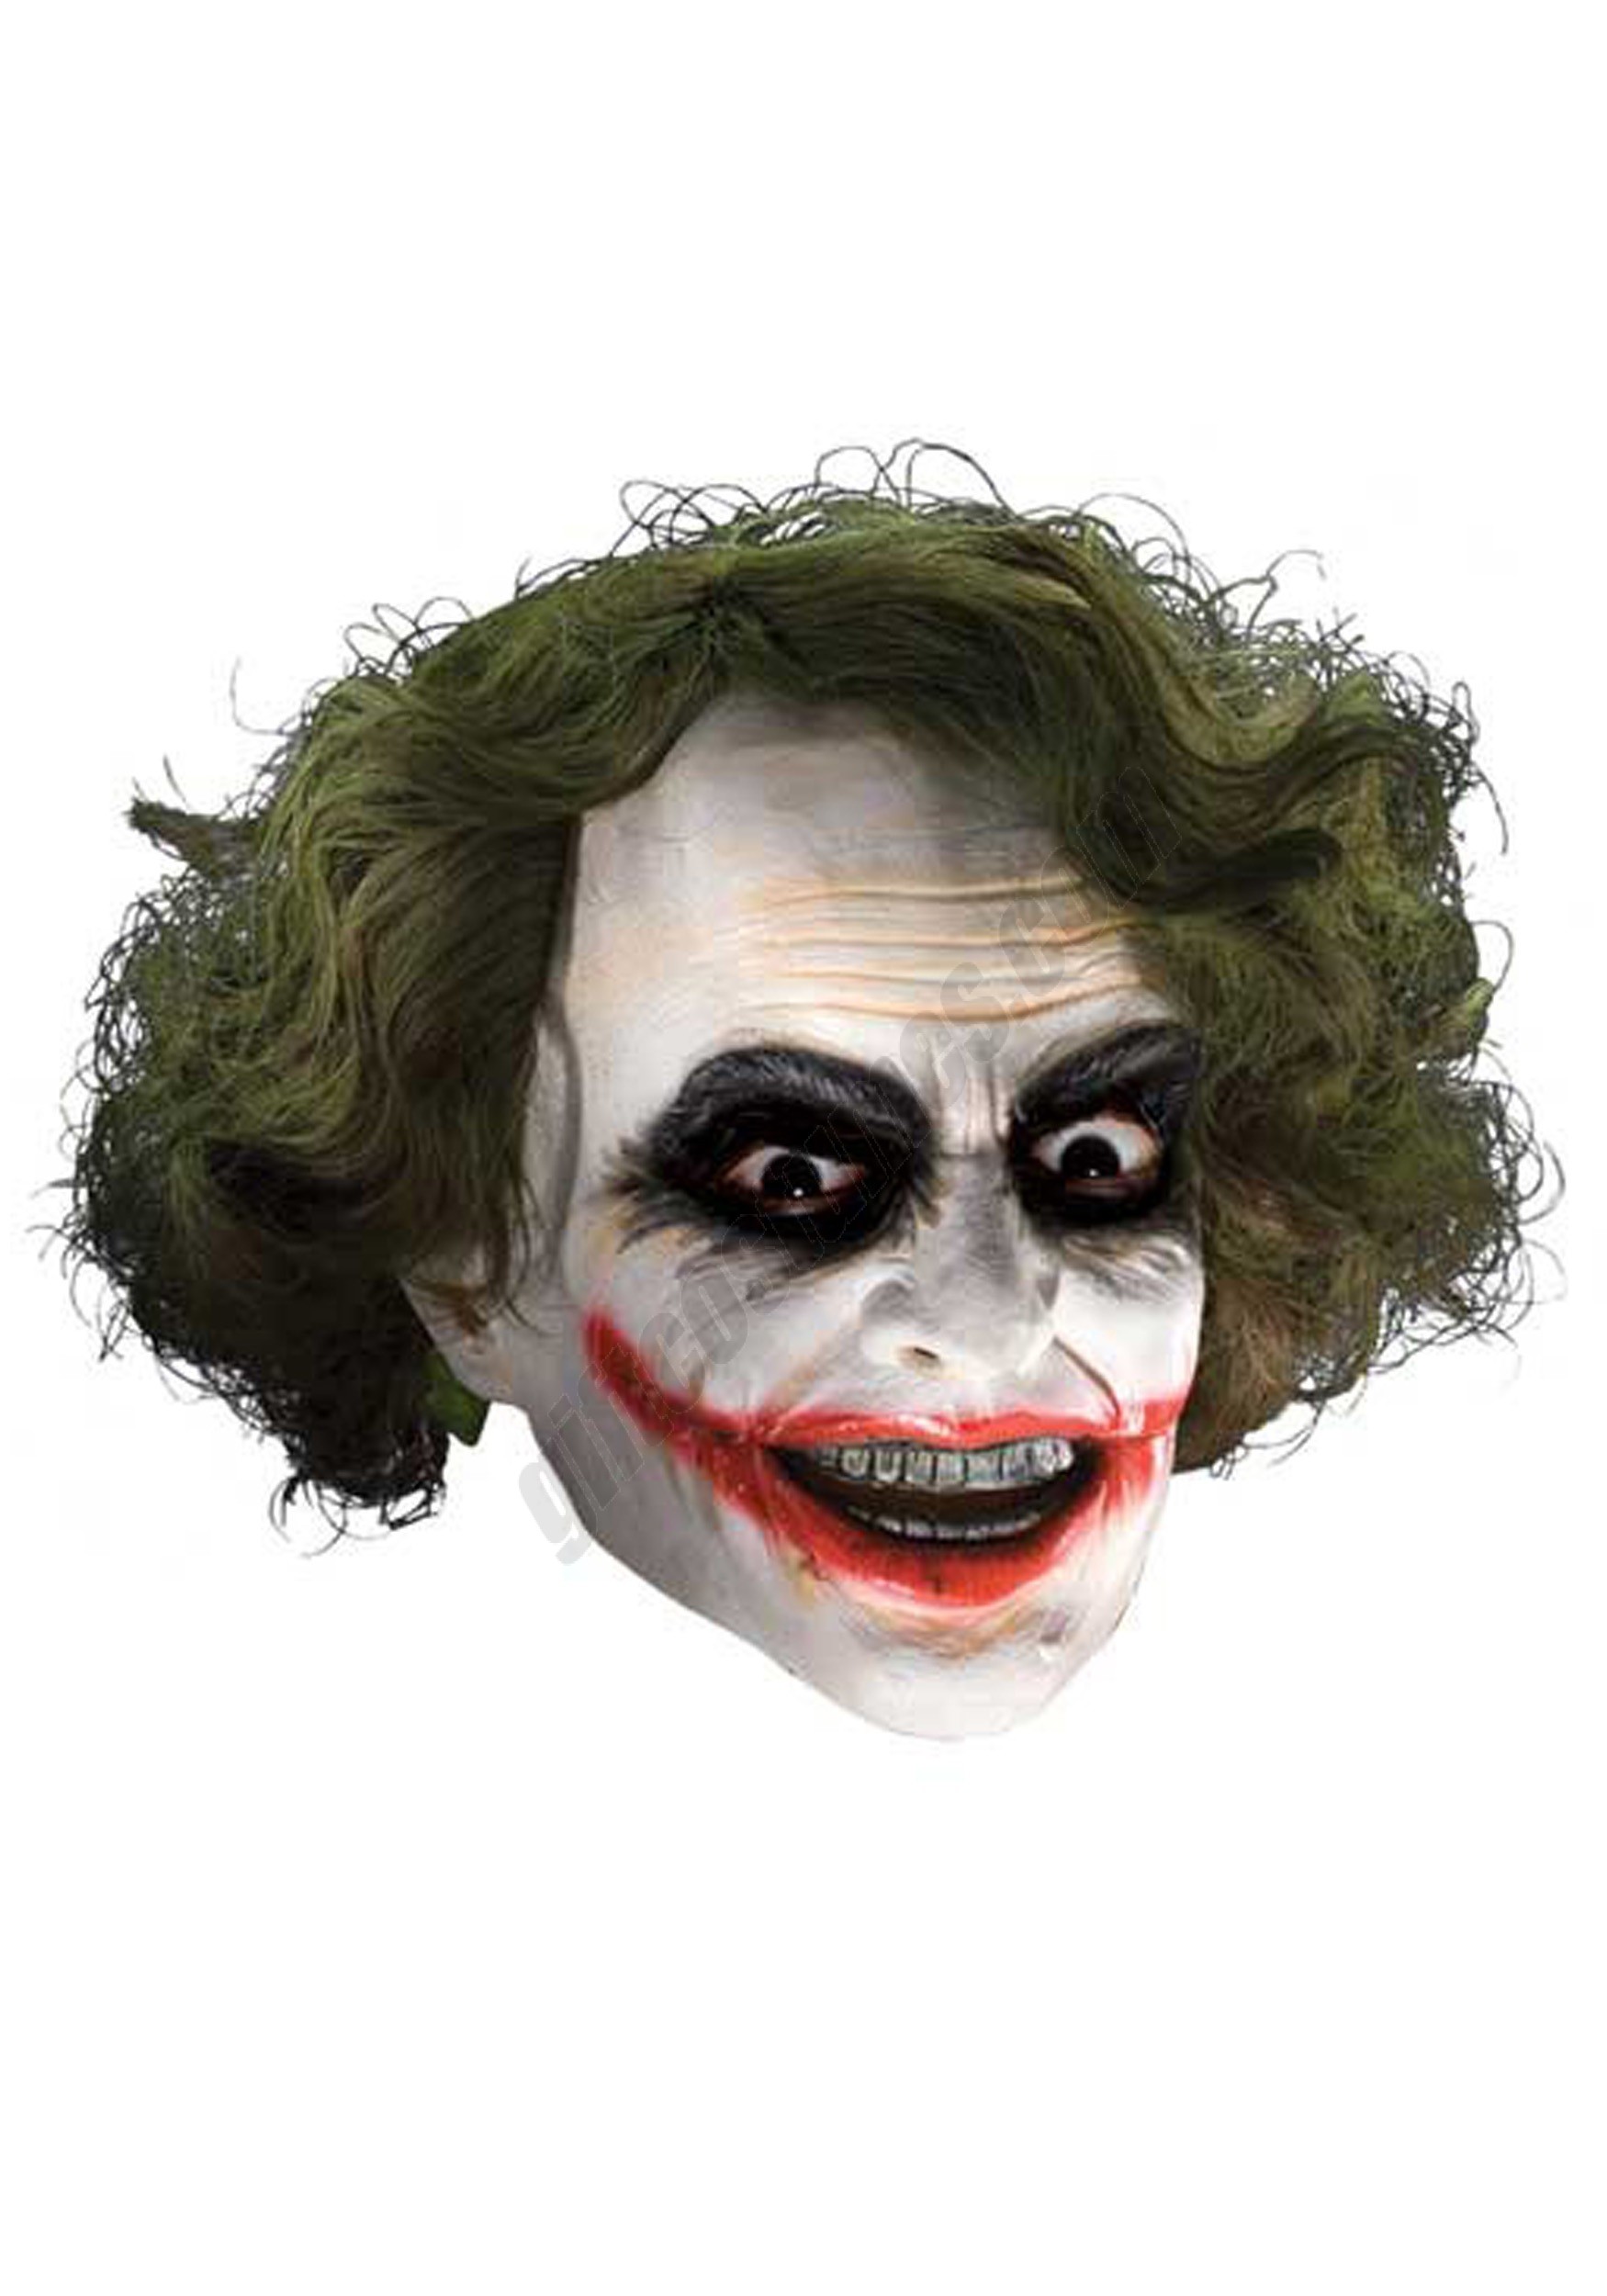 Adult Deluxe Joker Mask with Hair Promotions - Adult Deluxe Joker Mask with Hair Promotions